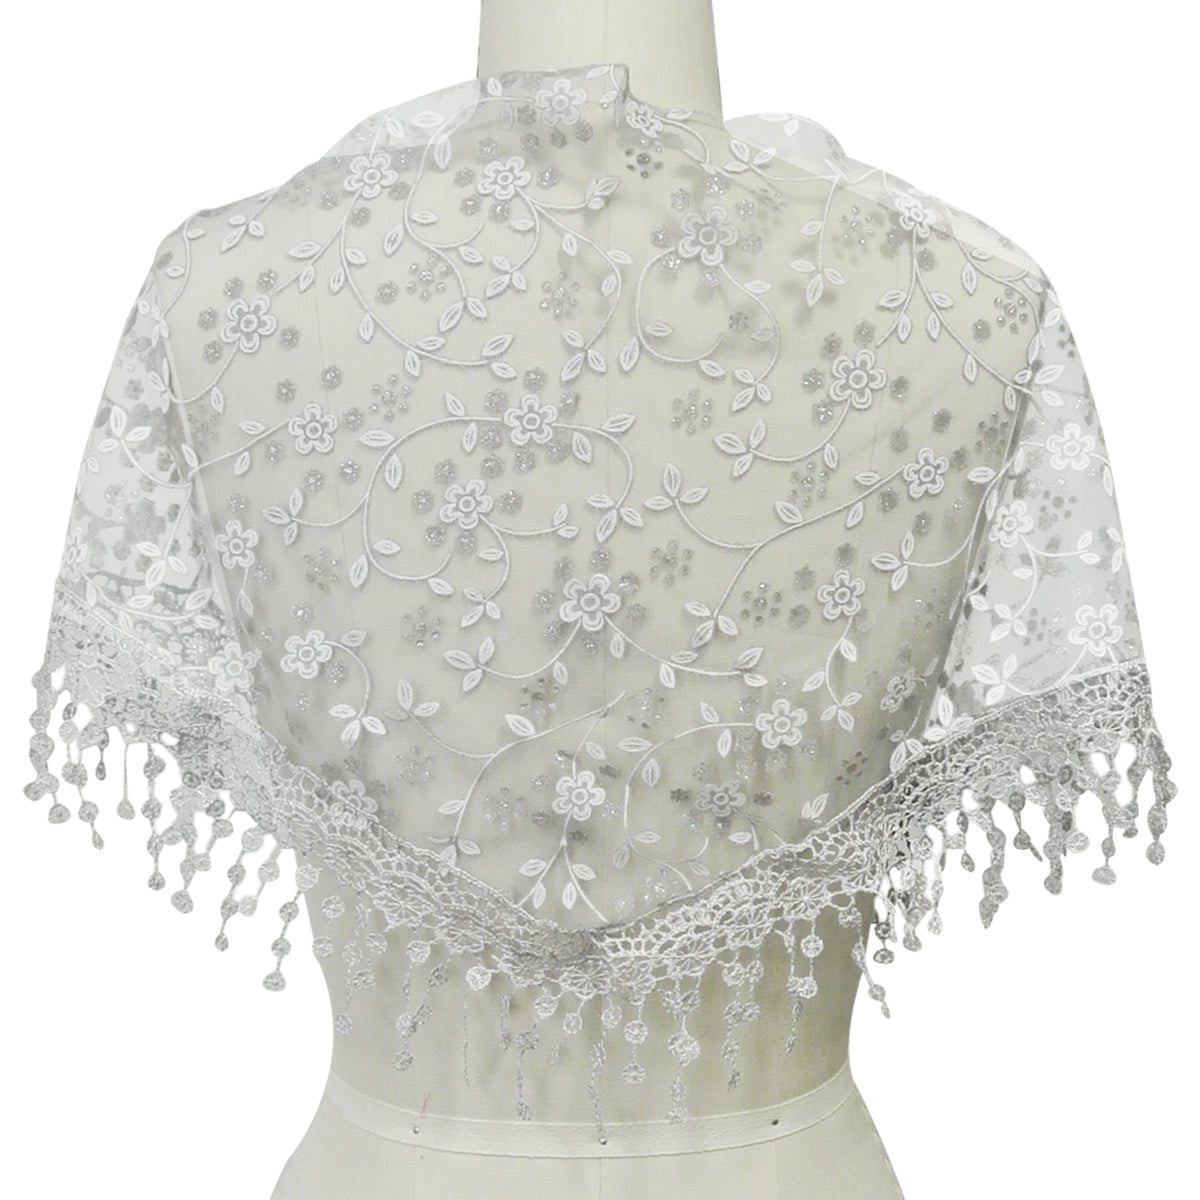 Wrapables Embroidered Floral Lace Triangle Scarf Shawl